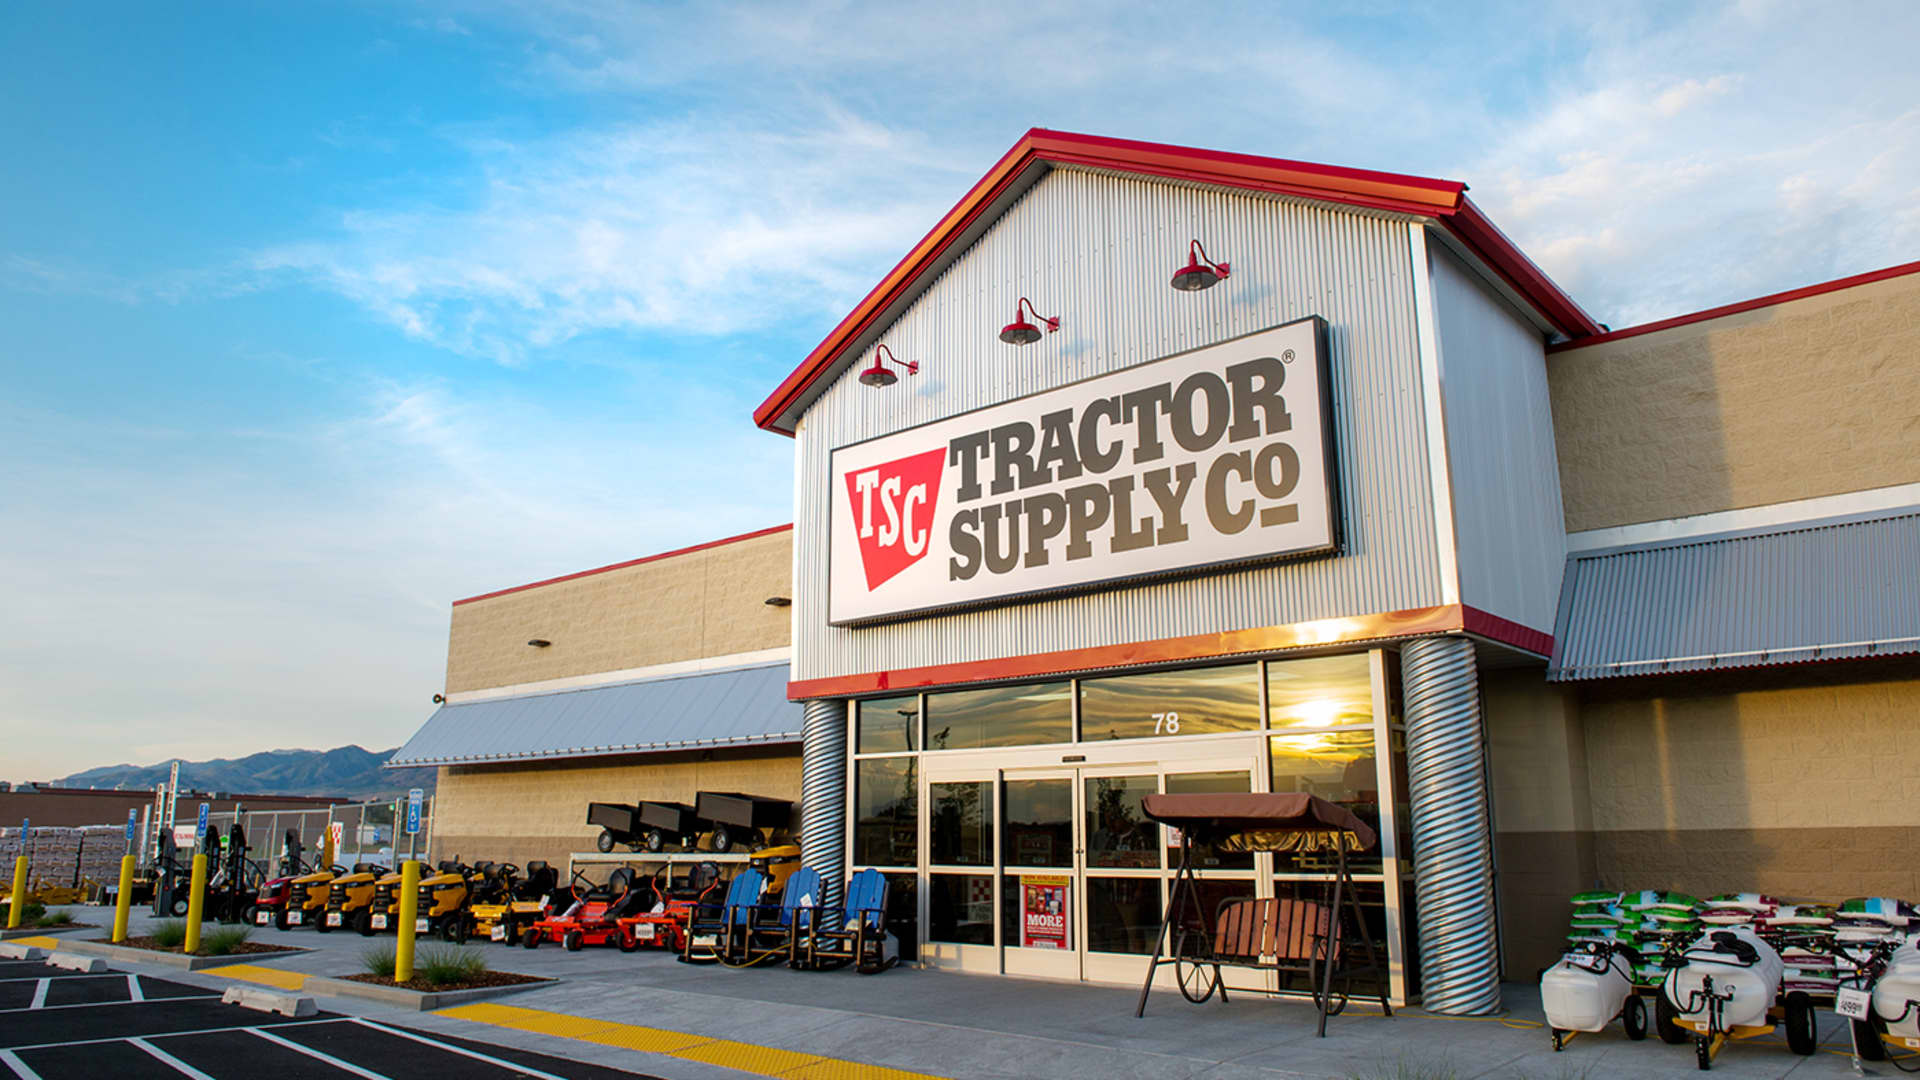 Tractor Supply CEO says there's still 'significant migration' out of urban areas - CNBC